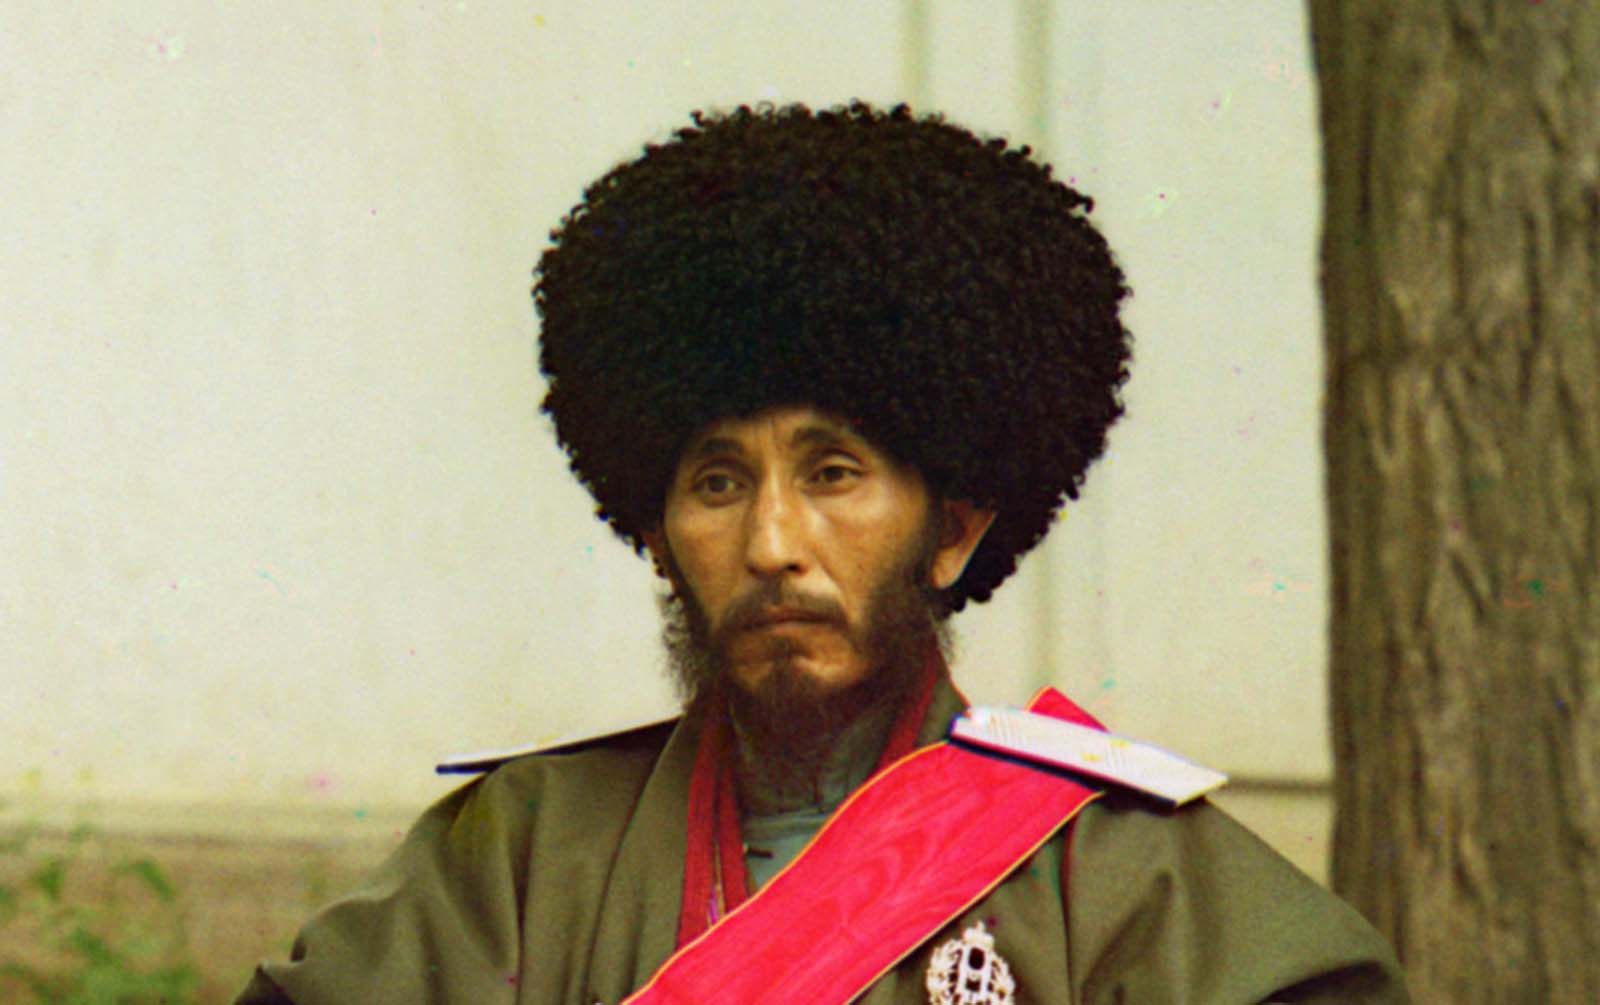 A closer detail view of Isfandiyar, Khan of the Russian protectorate of Khorezm. This photo would have been taken near the start of his reign in 1910, when he was 39 years old. He ruled Khorezm until his death in 1918.